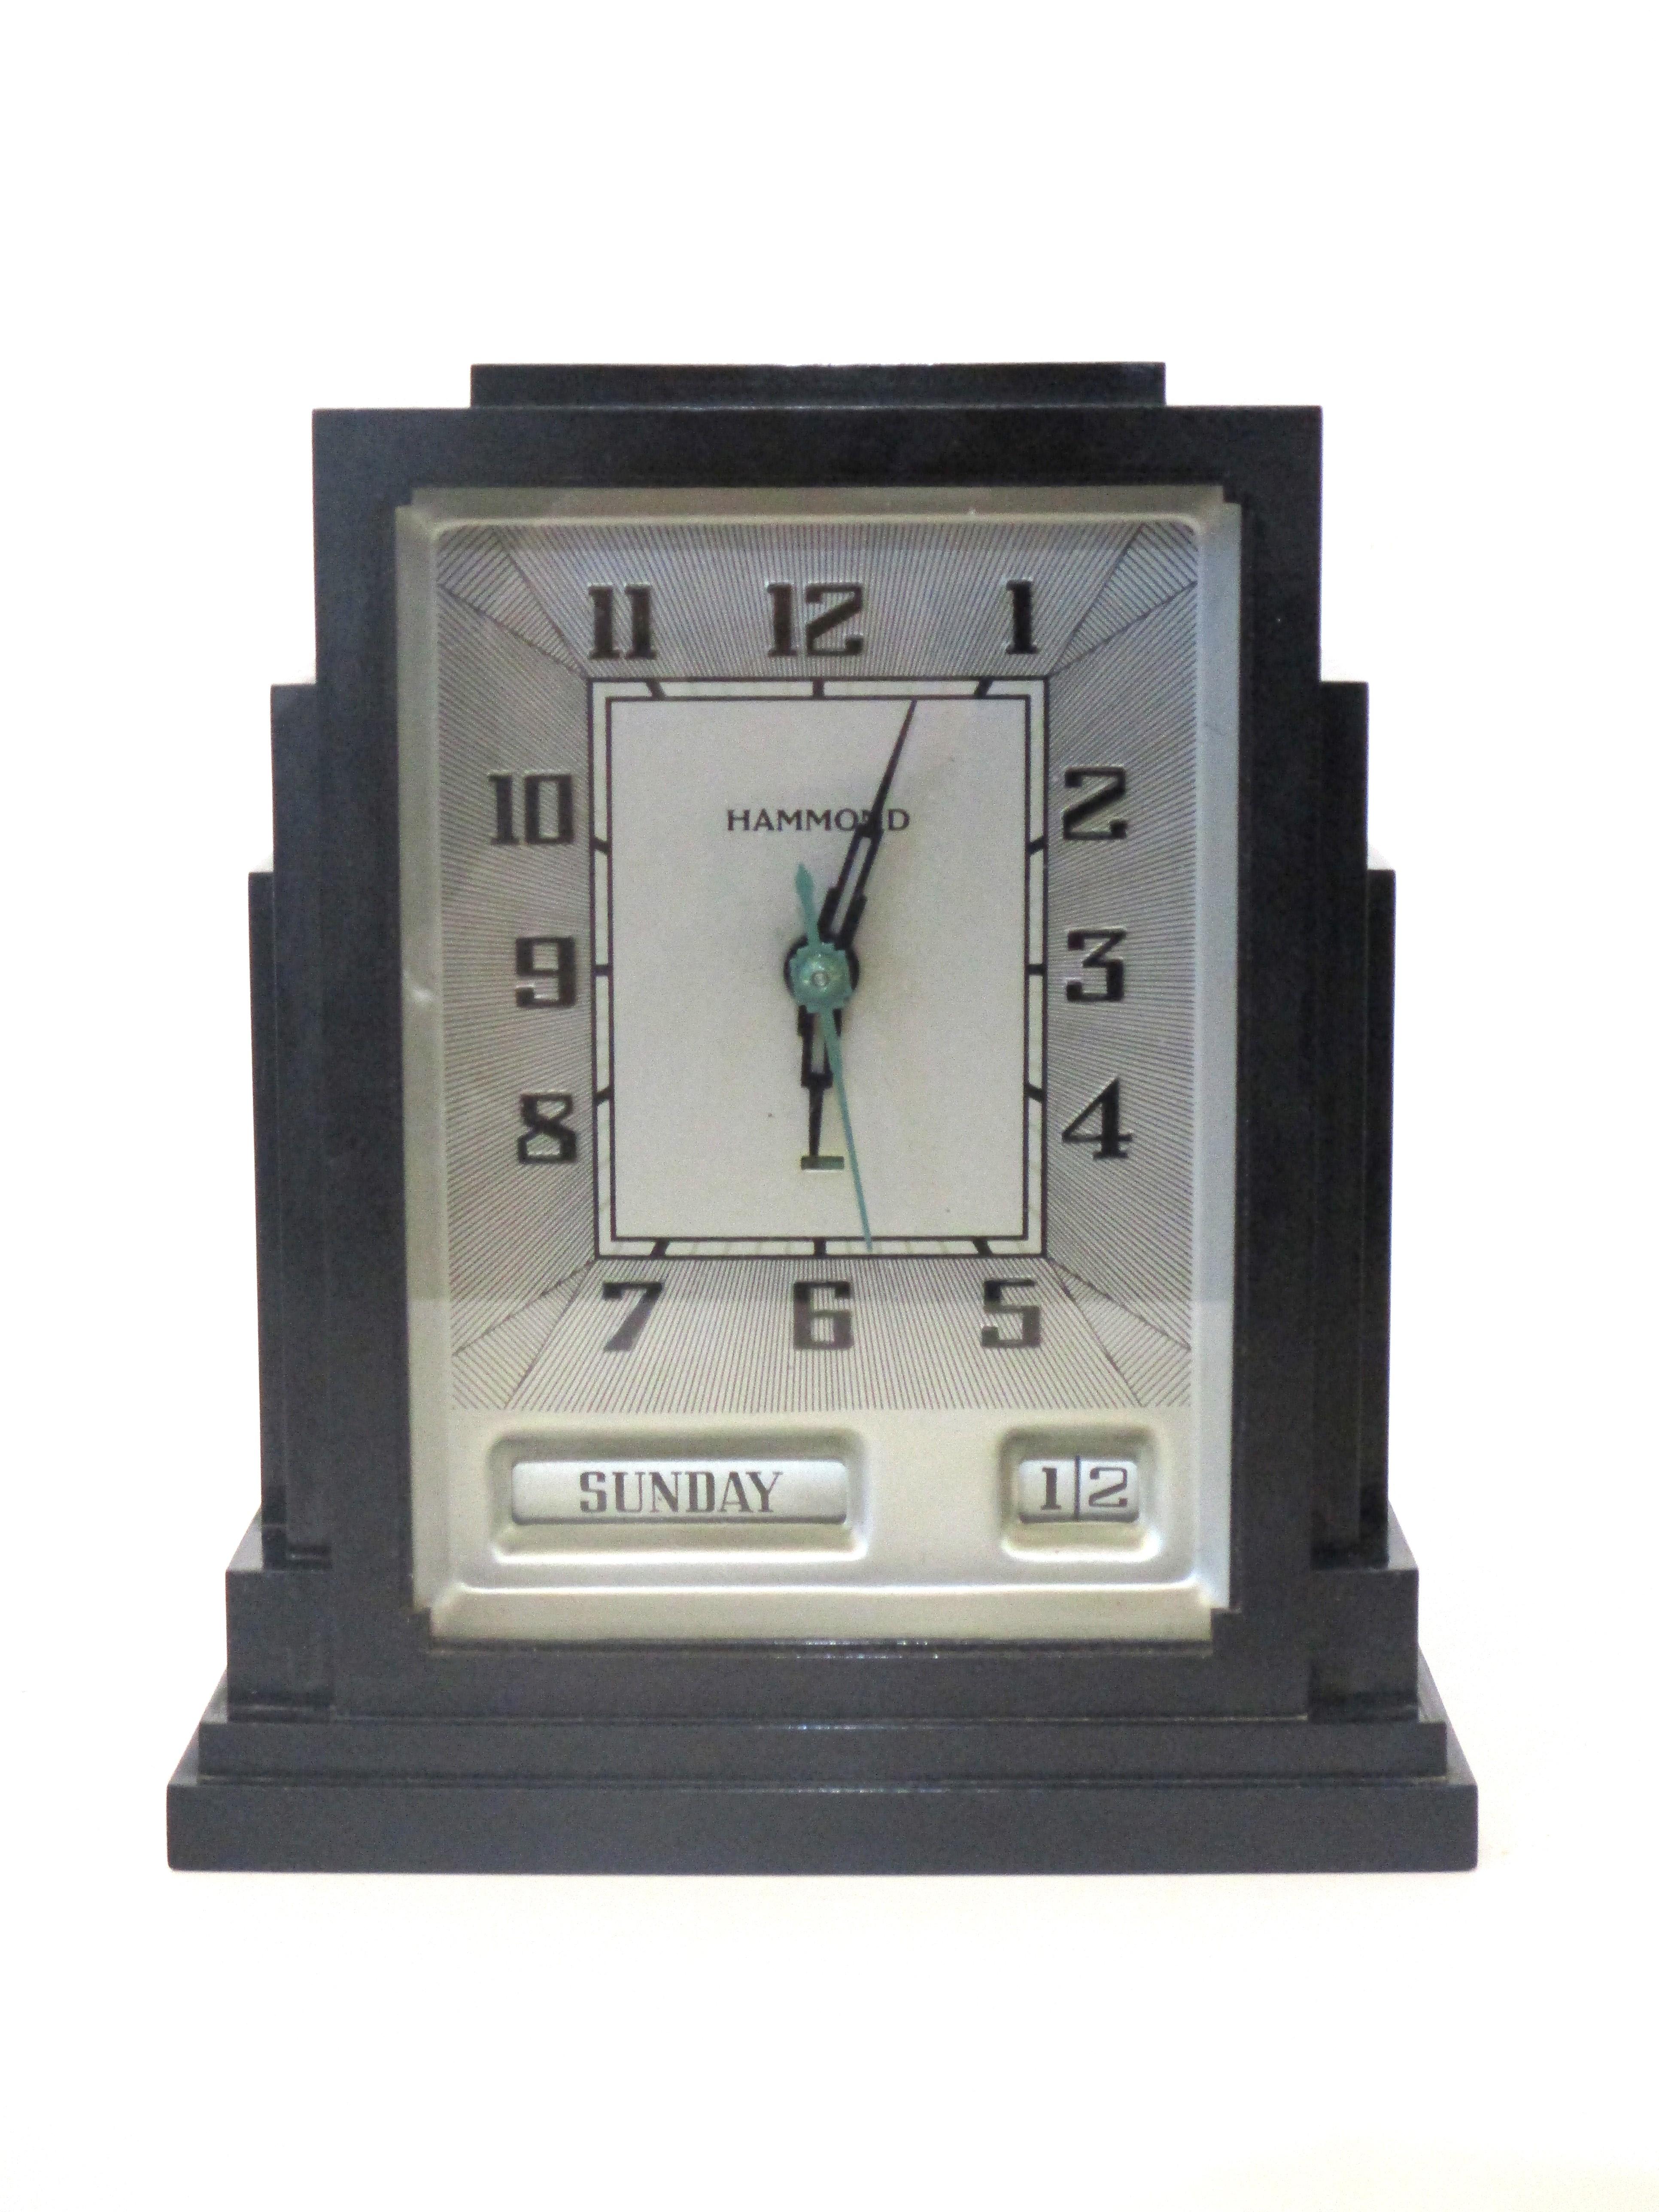 A rare day and date Art Deco skyscraper styled clock with dark bakelite case and metal face with black and green skyscraper hands. The lower area has the day and date which make this clock unique, manufactured by the Hammond Clock company known for